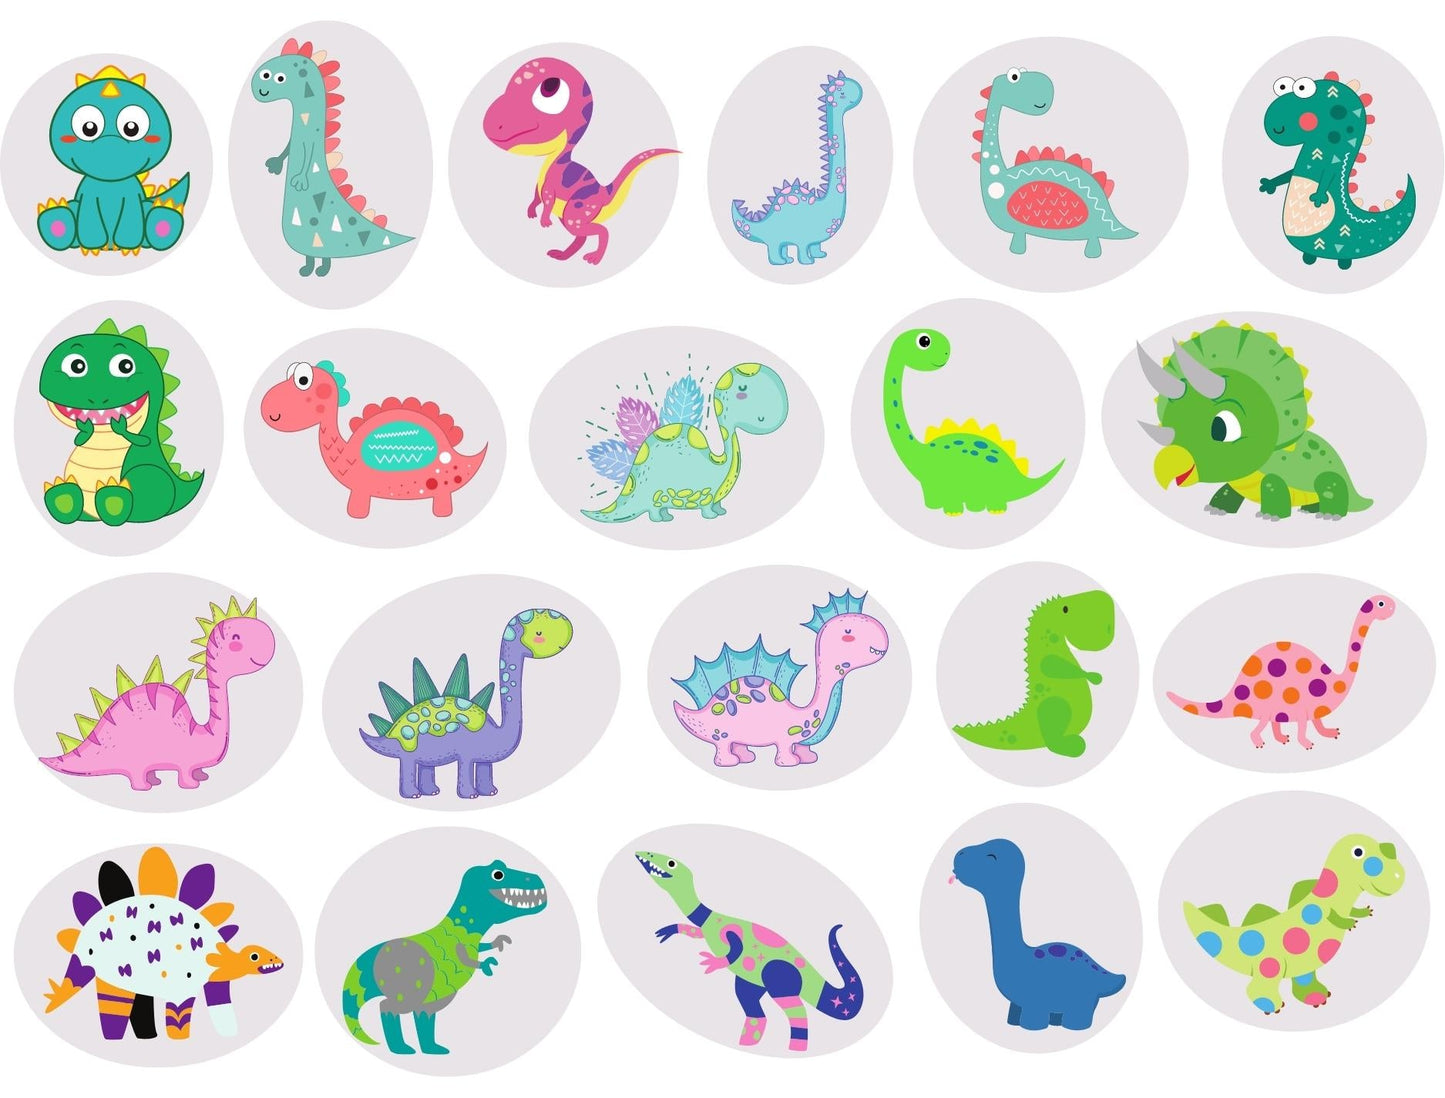 Dinosaur Themed Stickers on Zero Waste Release Liners